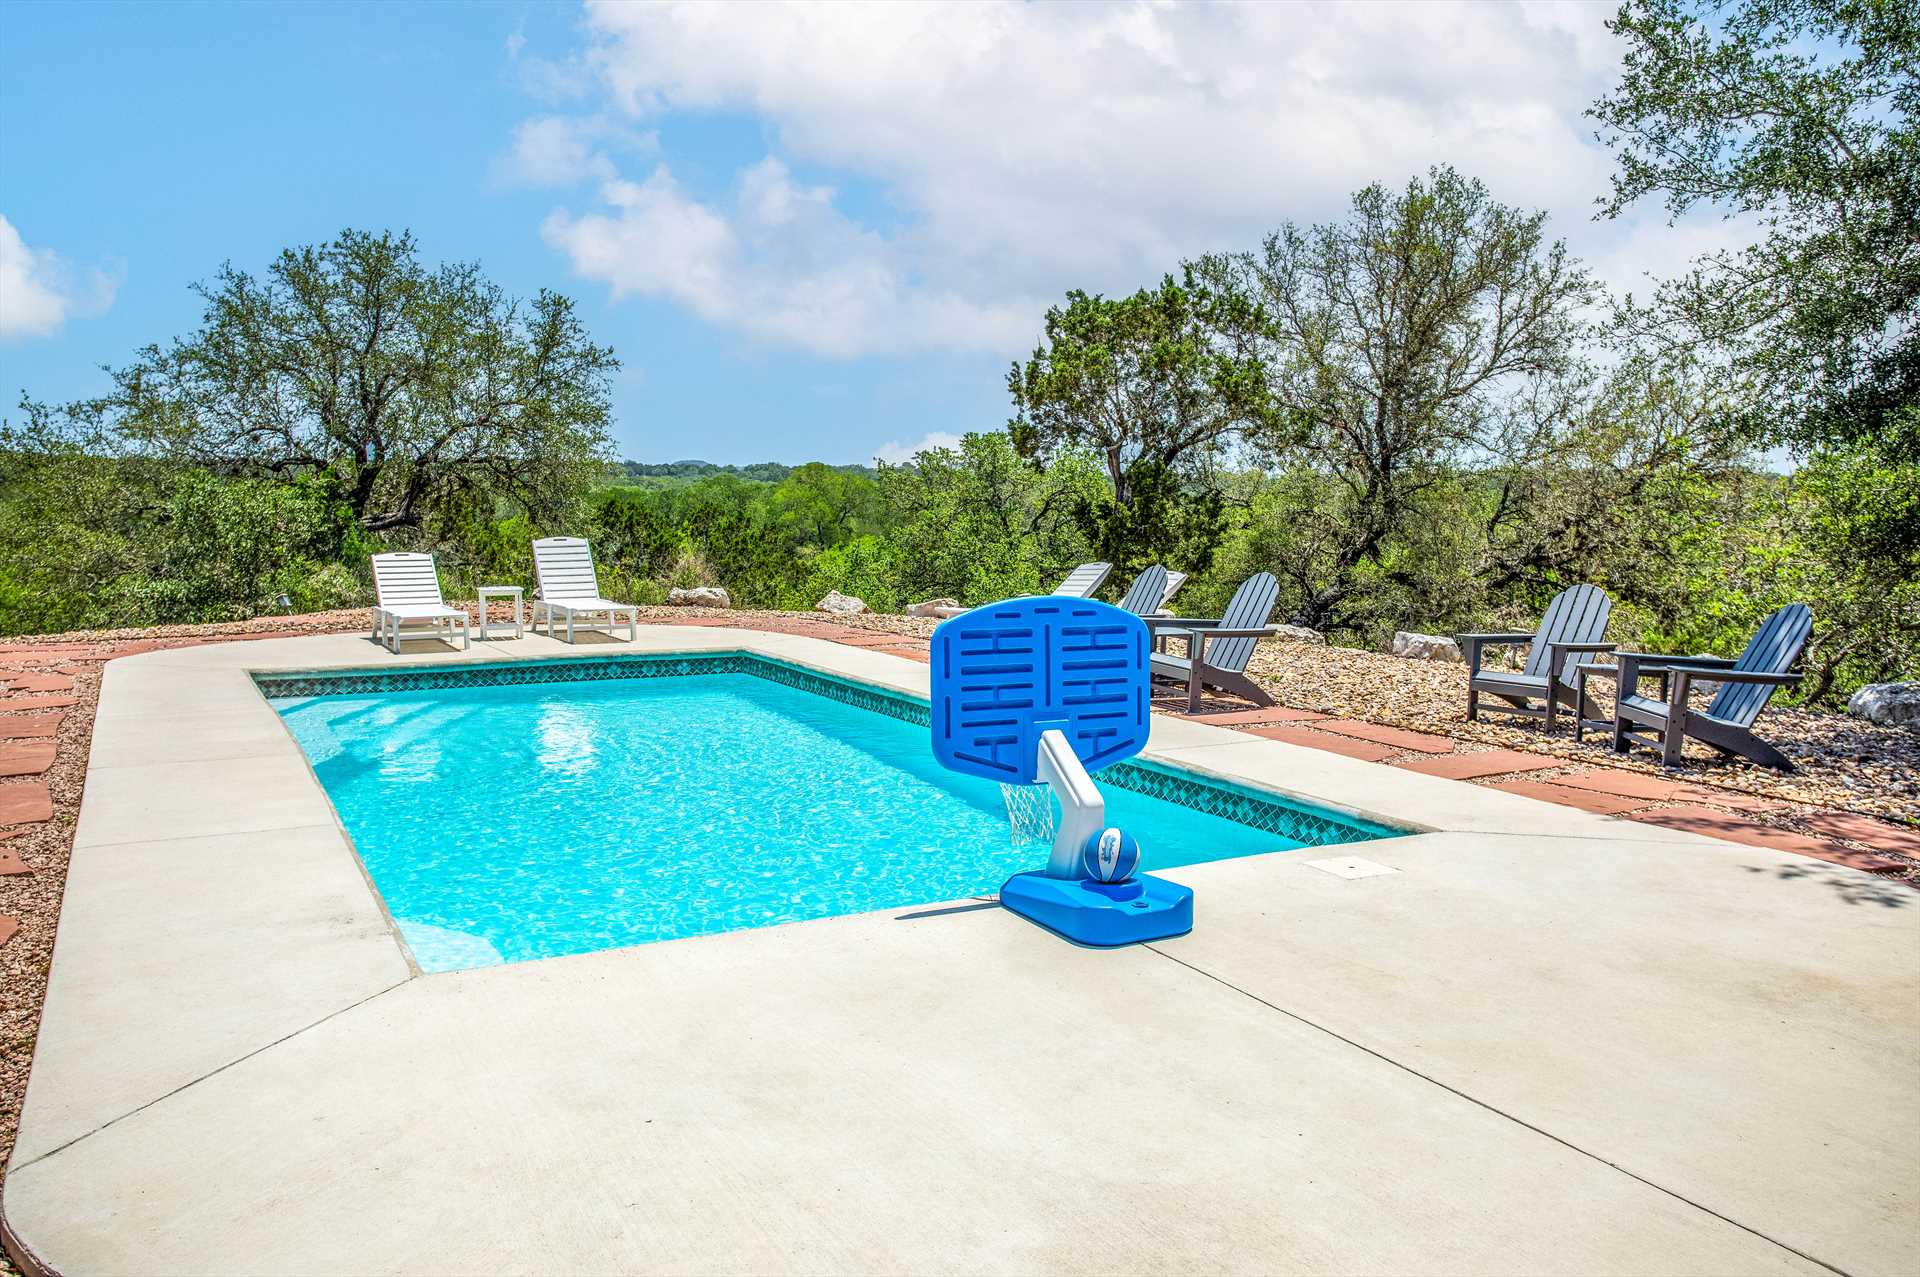                                                 Keep the sizzling Texas heat at bay with a refreshing dip in the crystal-clear pool!